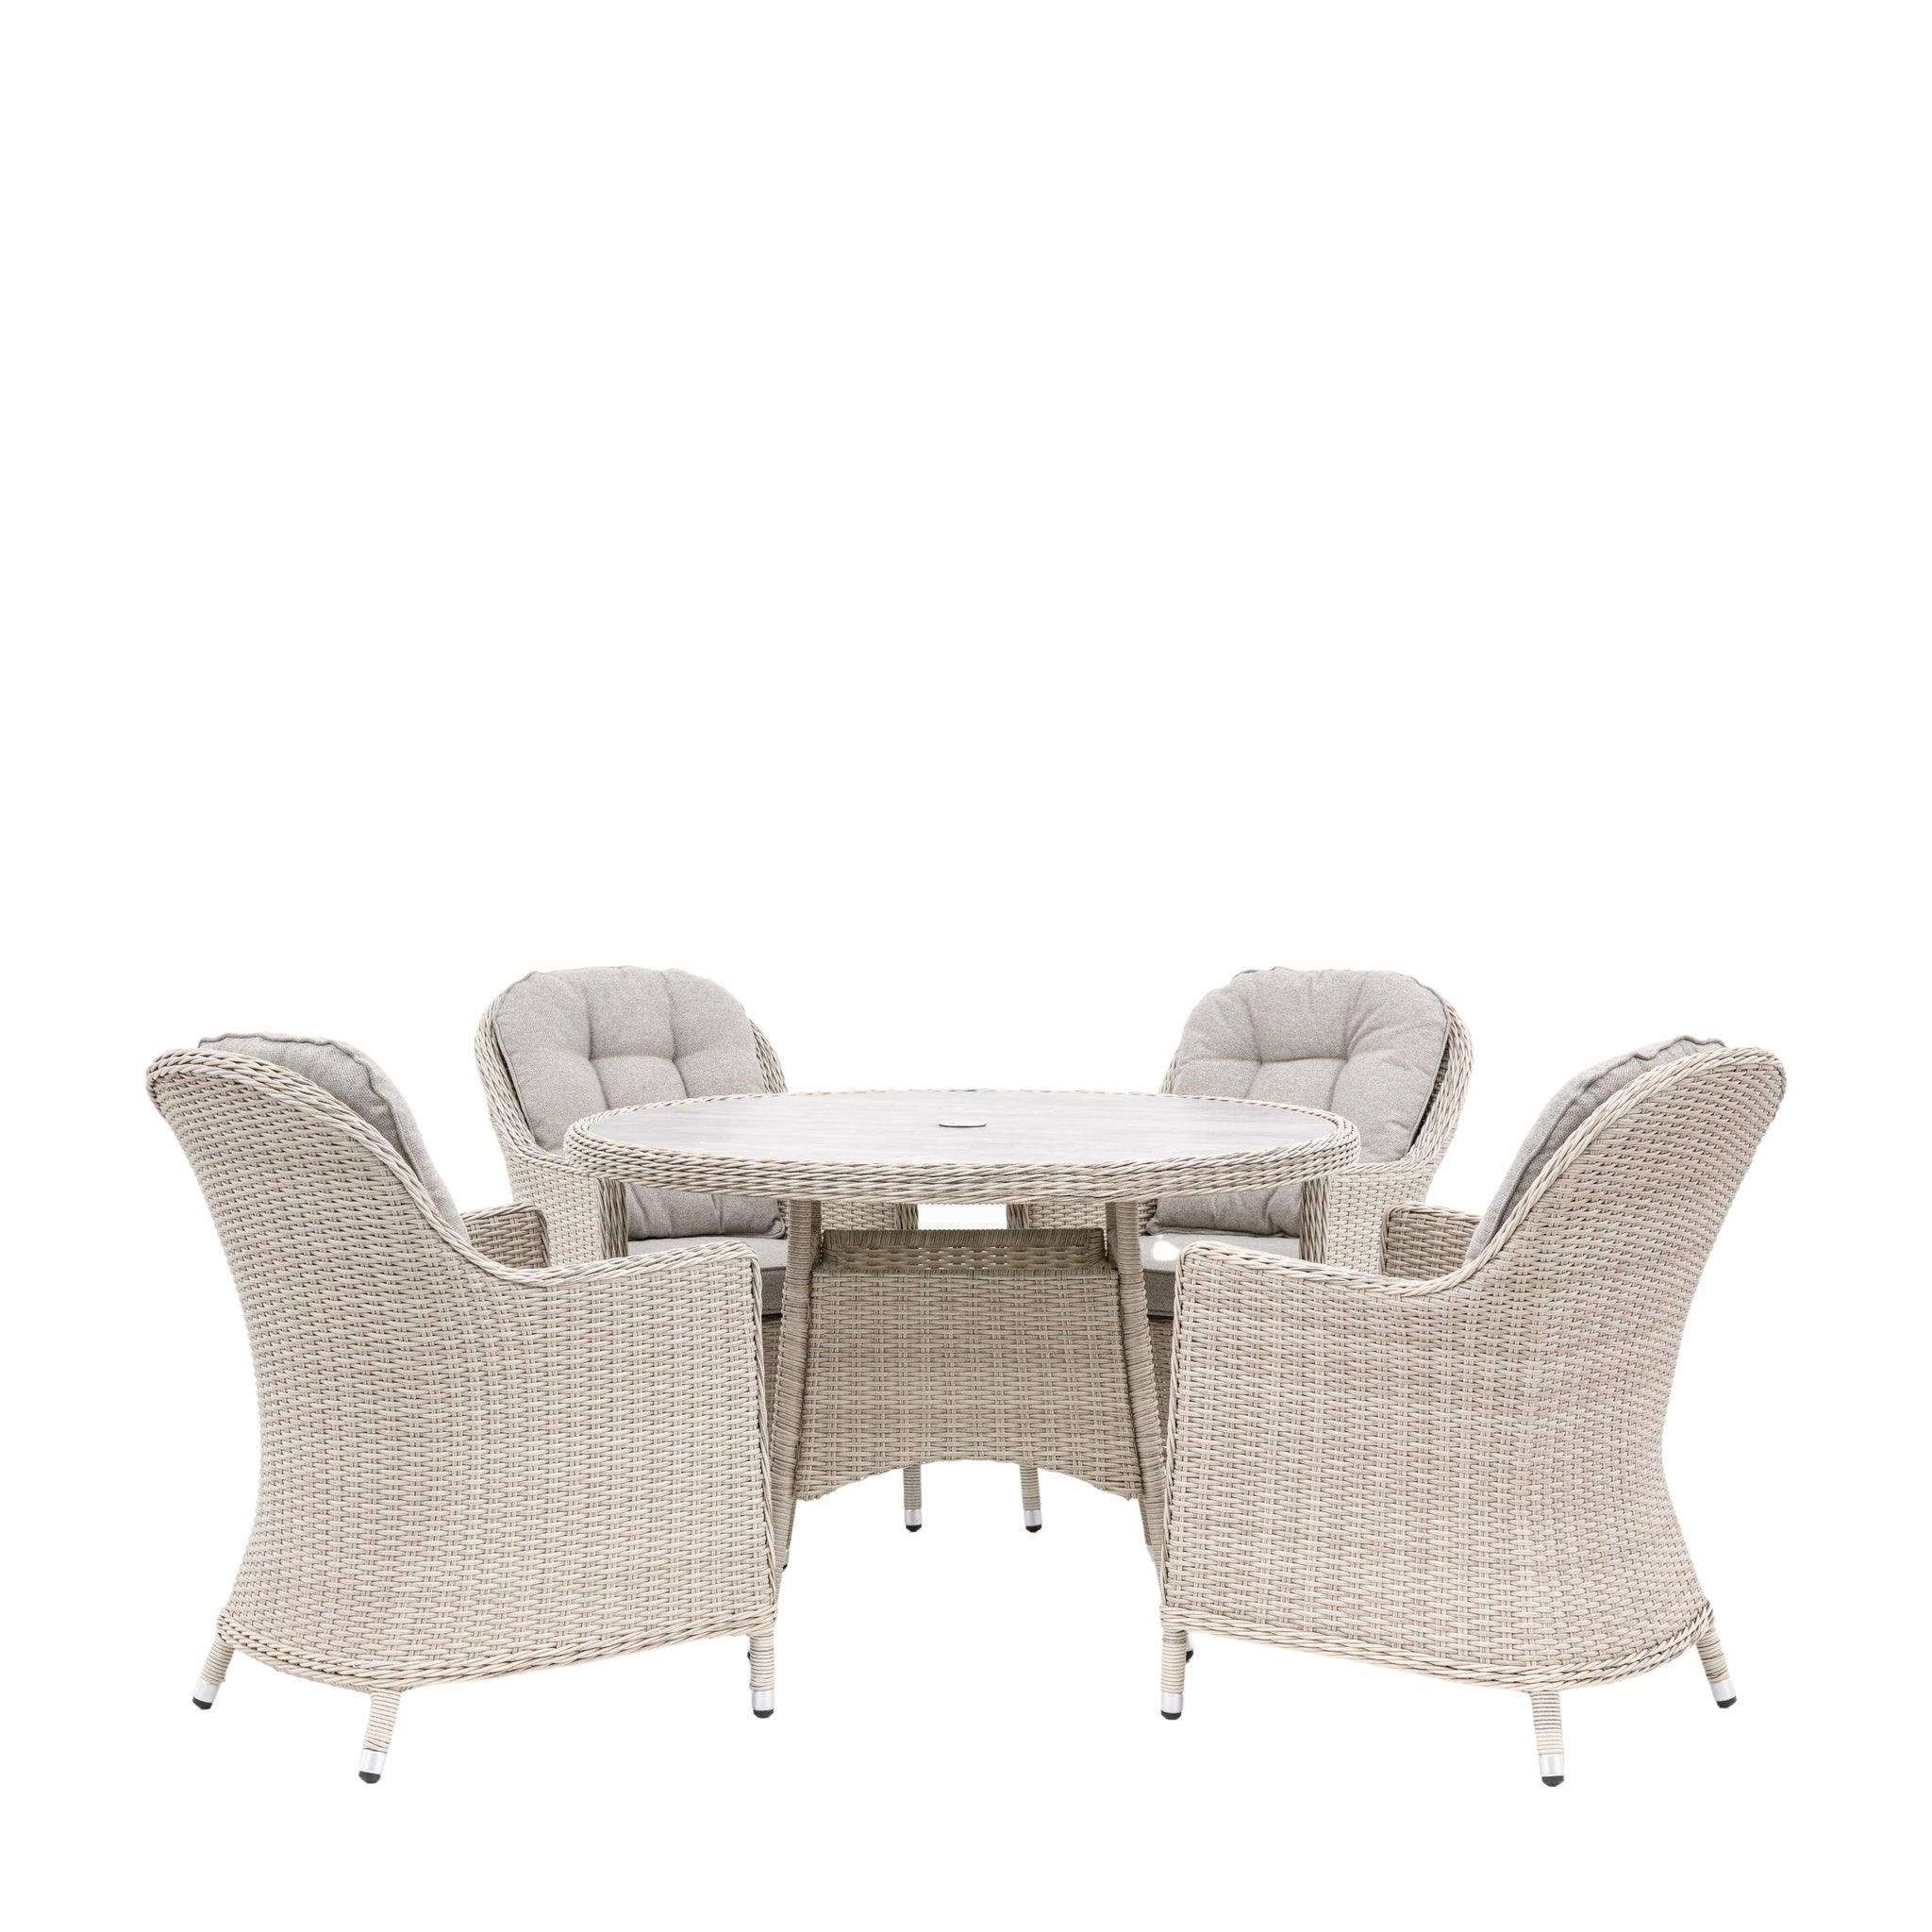 Colton 4 Seater Round Dining Set